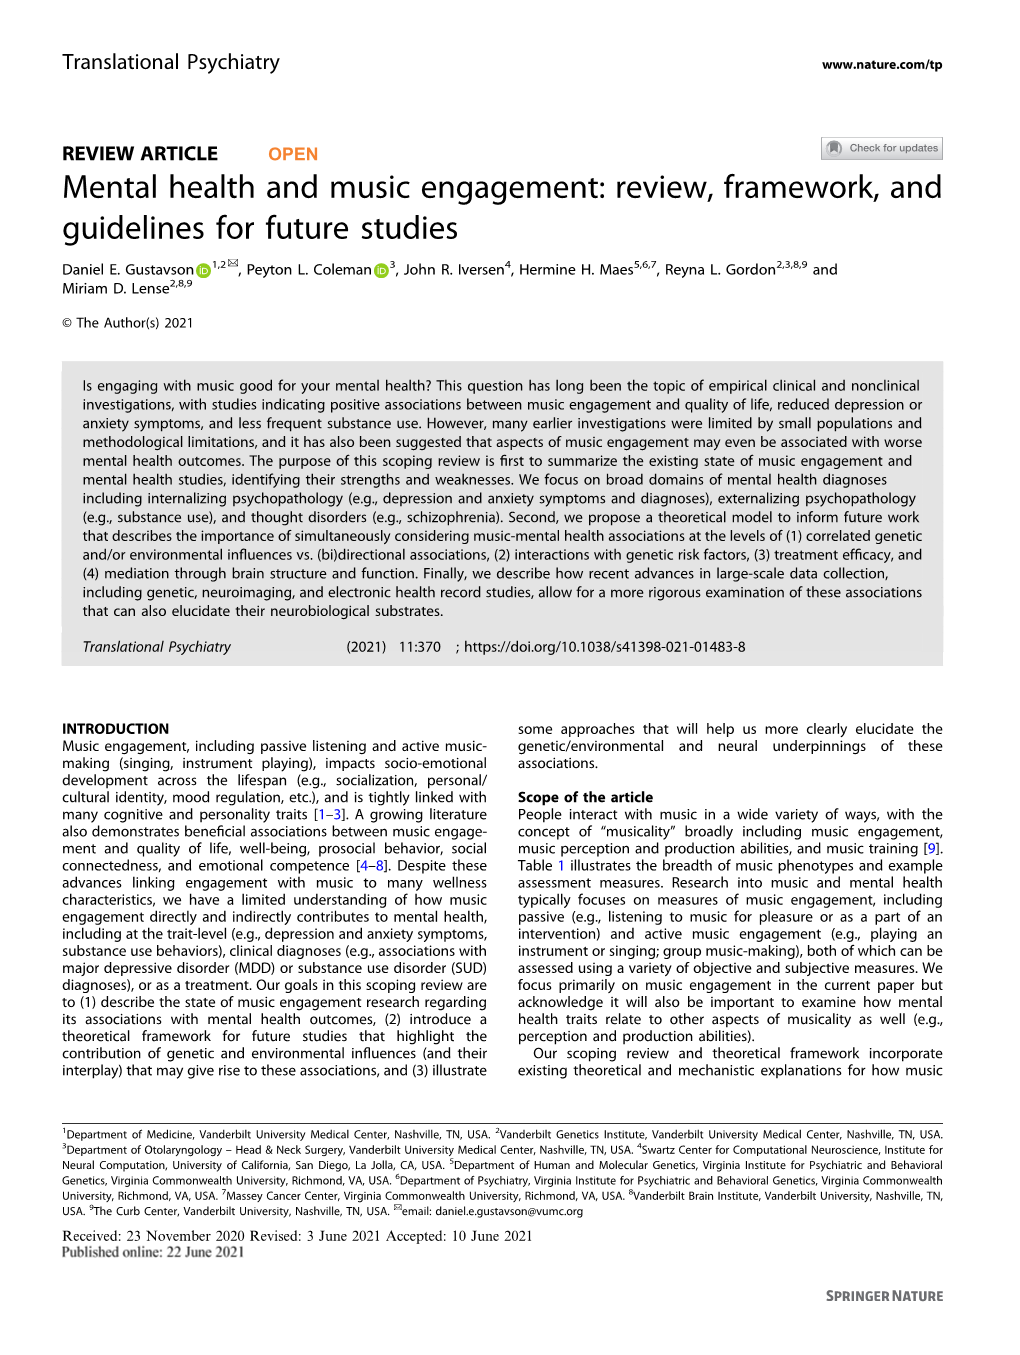 Mental Health and Music Engagement: Review, Framework, and Guidelines for Future Studies ✉ Daniel E